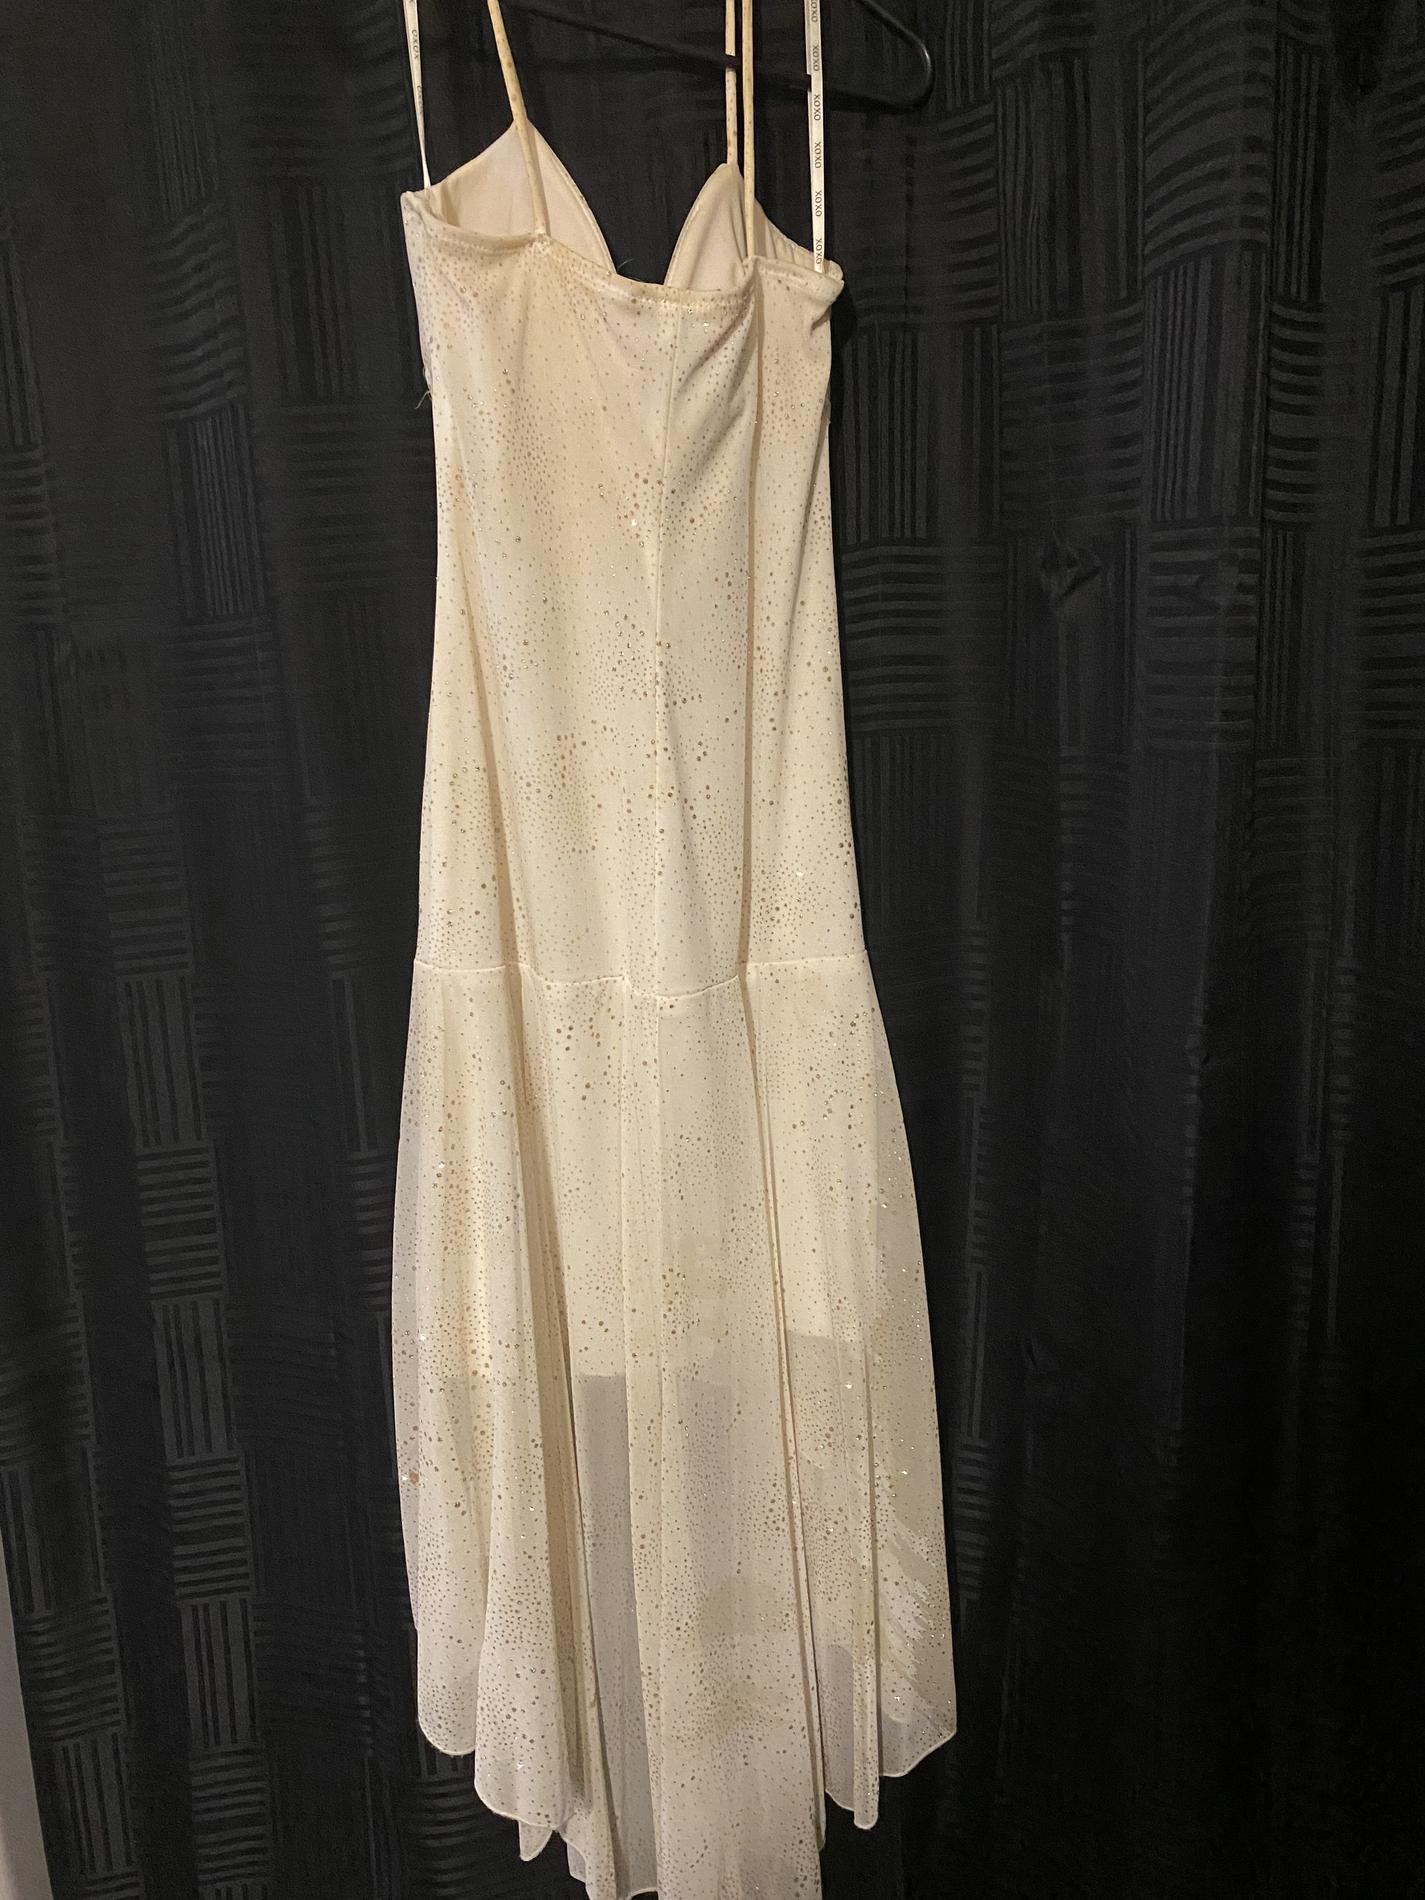 Xoxo Size 2 Bridesmaid Nude A-line Dress on Queenly